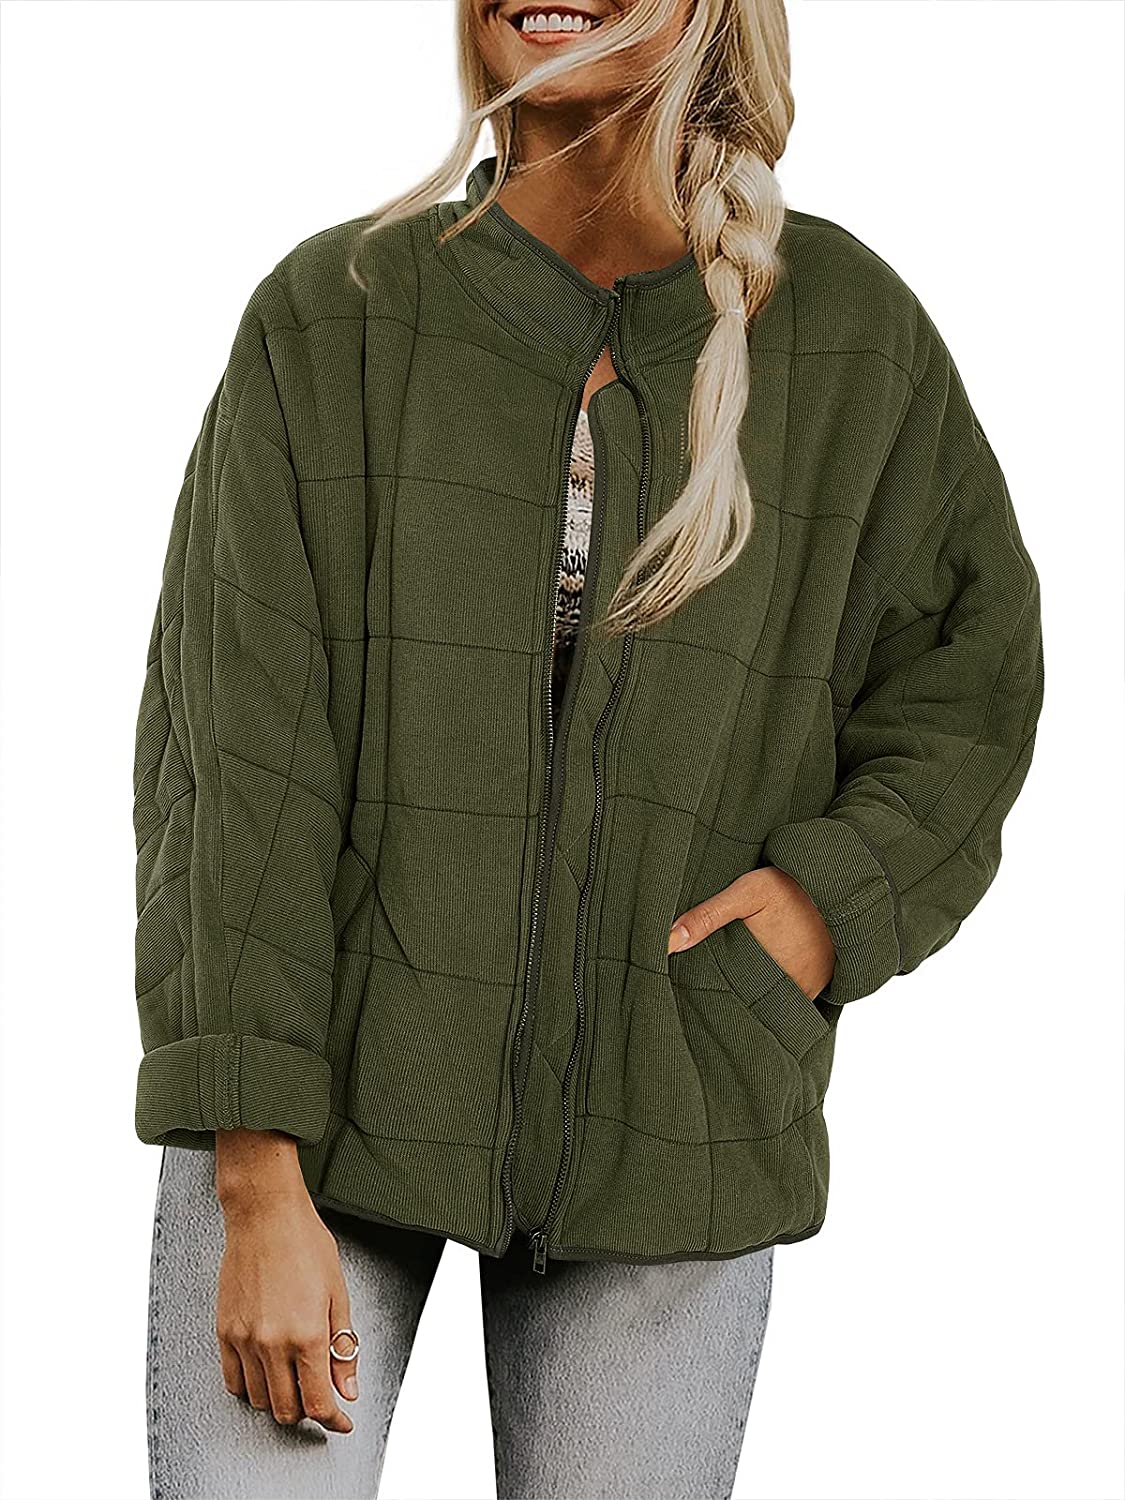 HTHLVMD Women's Lightweight Quilted Jacket Fully Lined Snap Warm Outwear  With Pockets